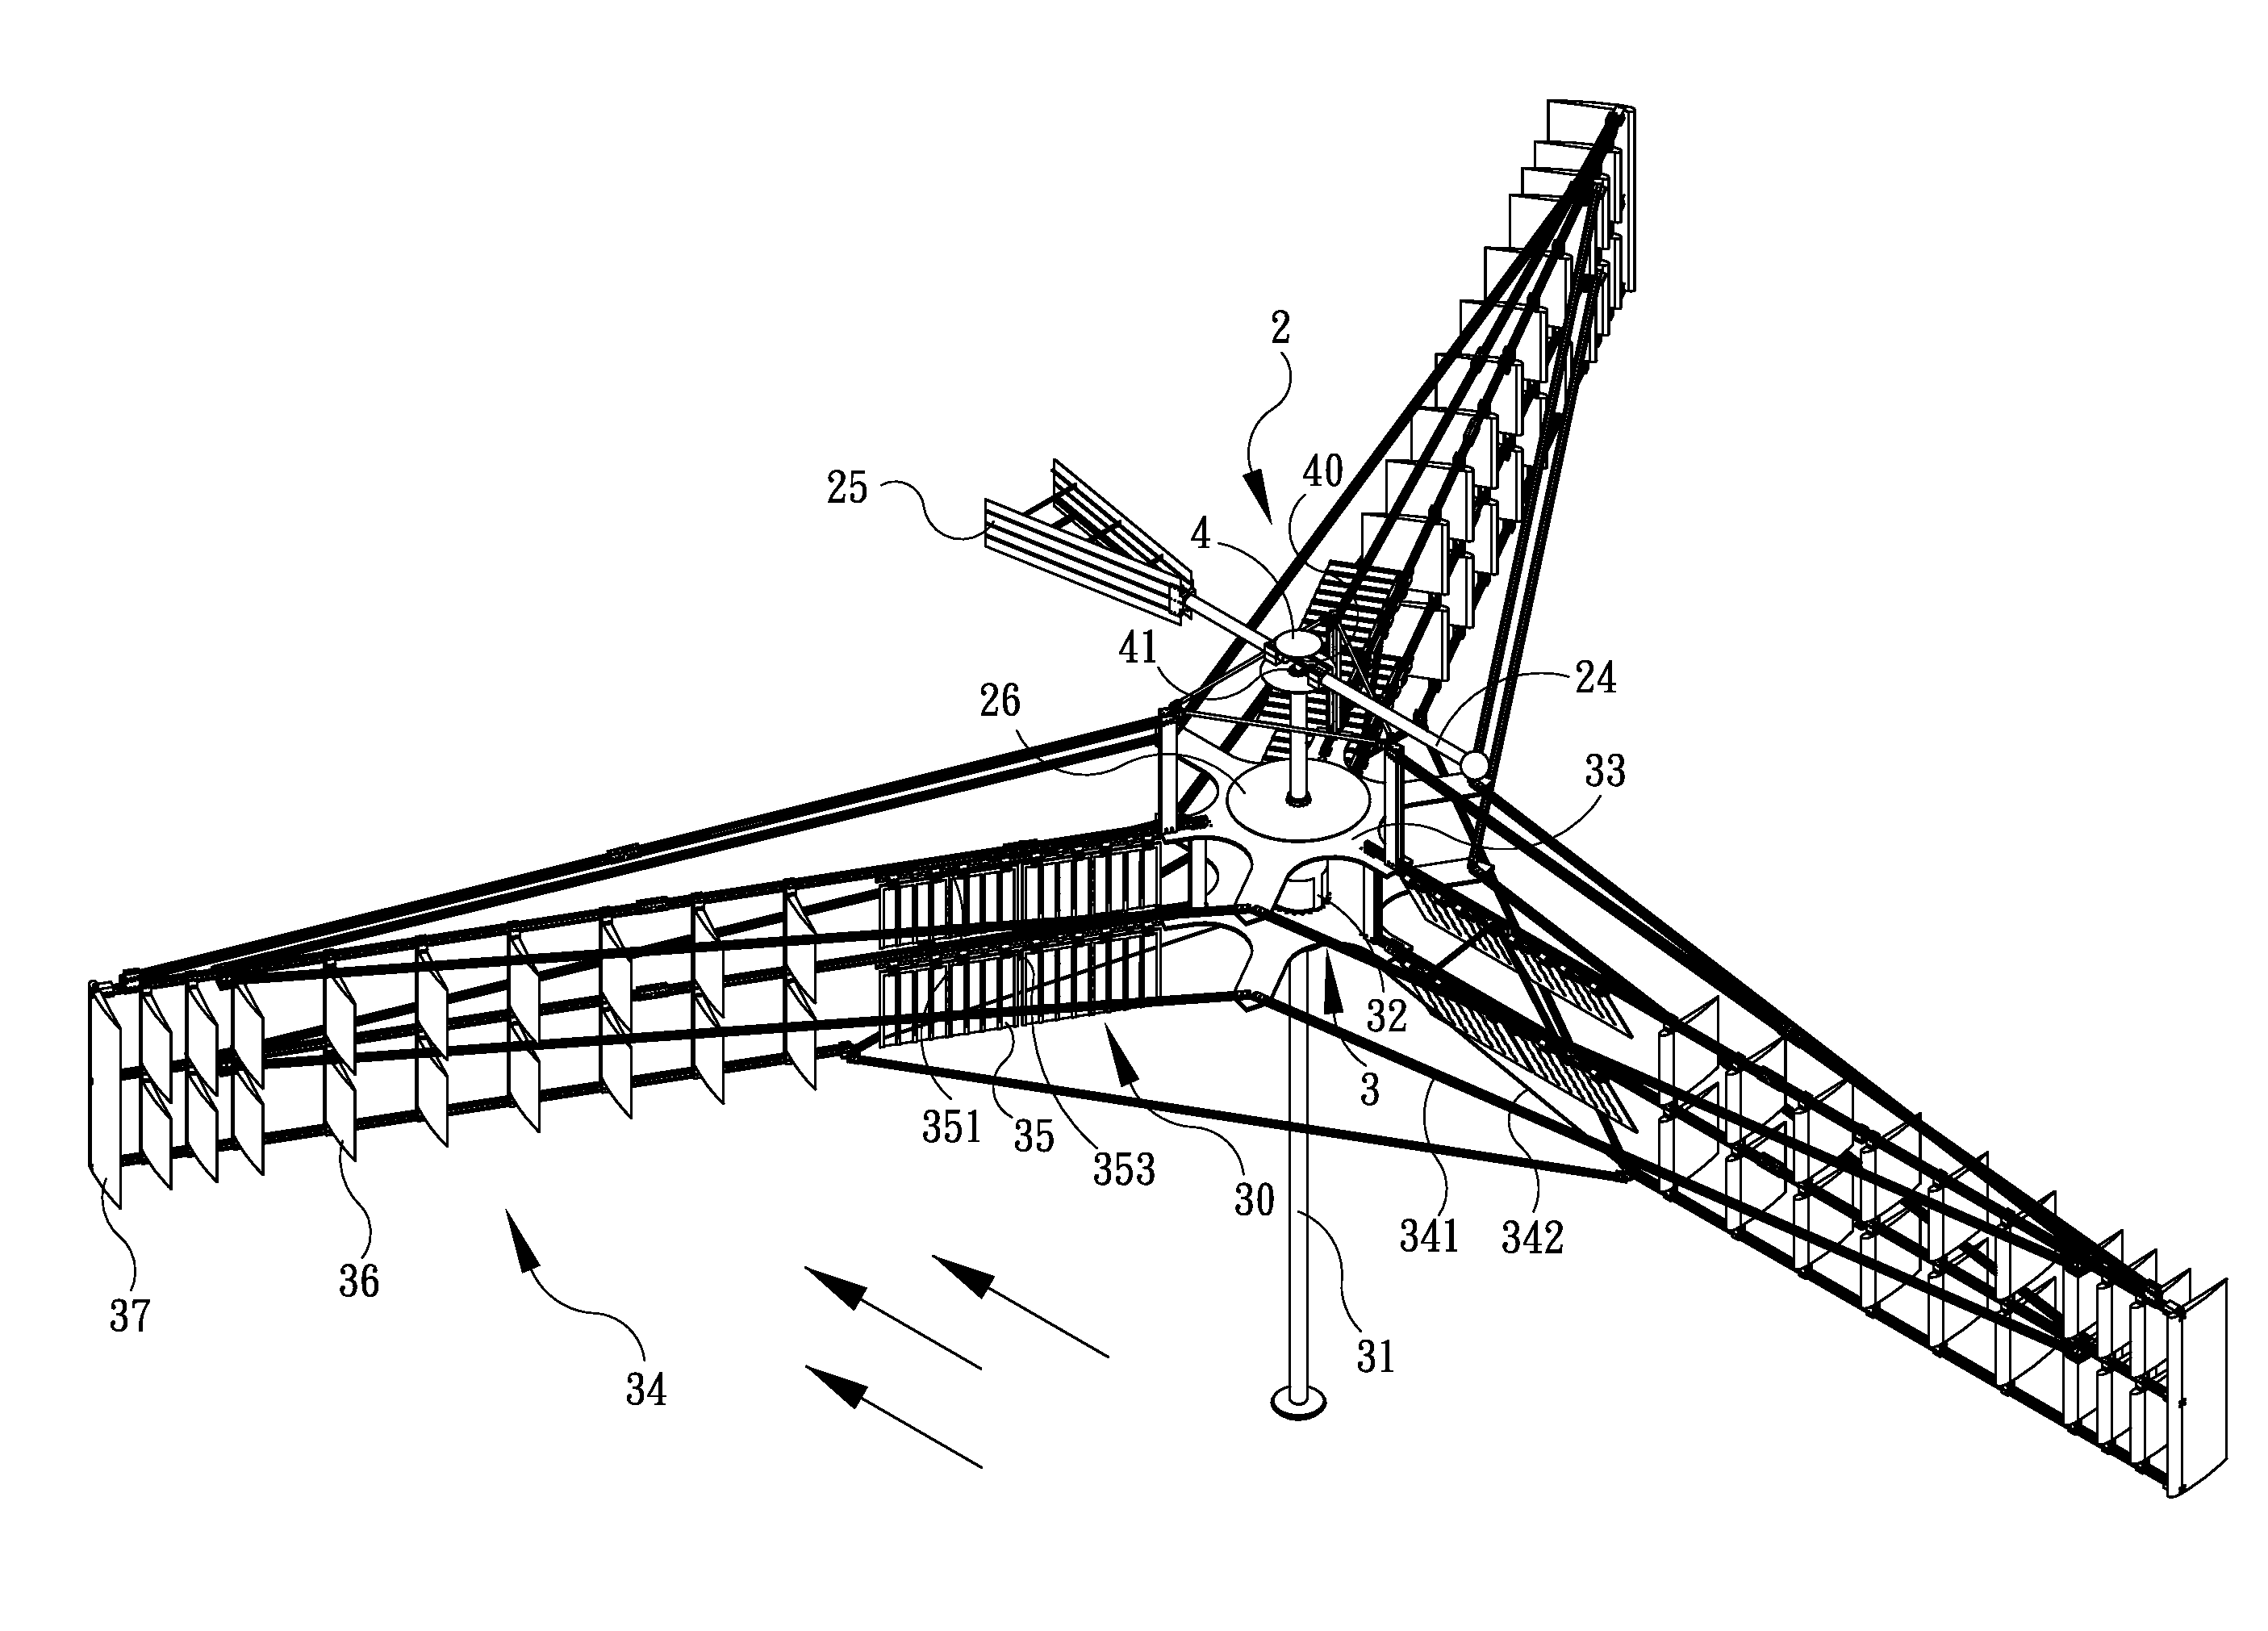 Tower type vertical axle windmill